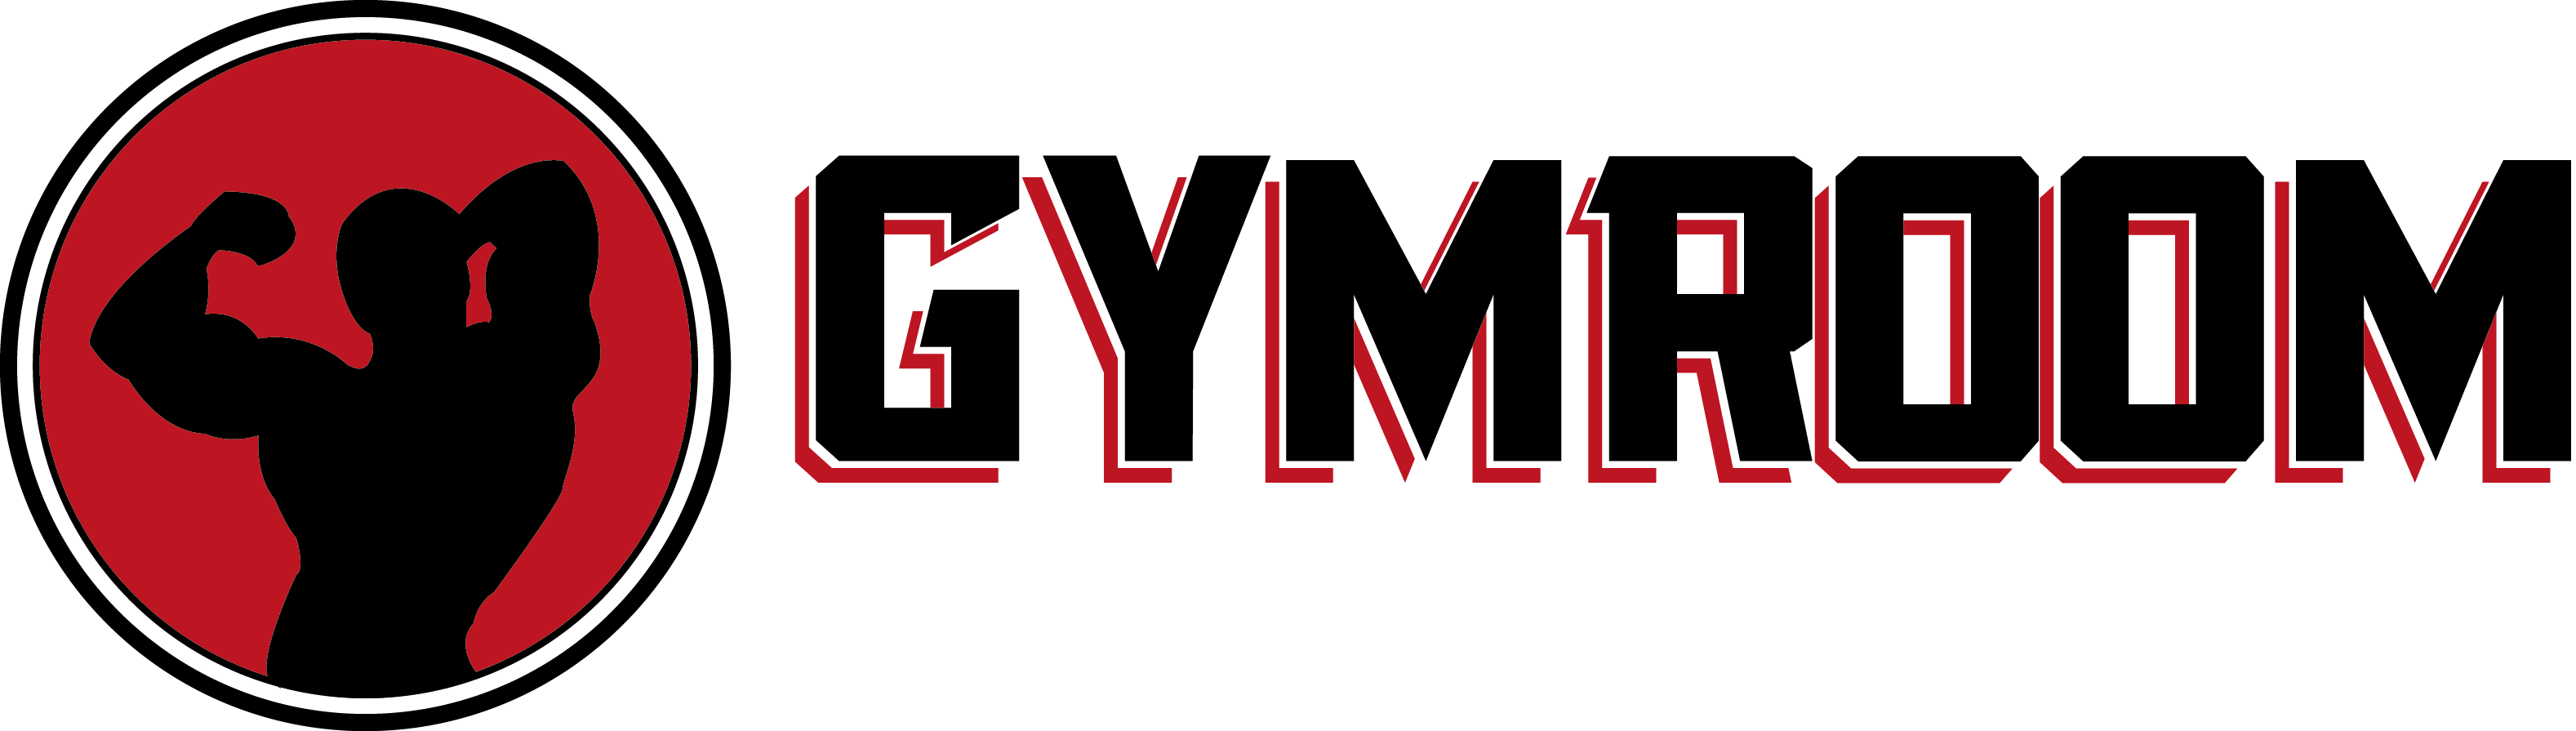 Gymroom Coupons & Promo Codes